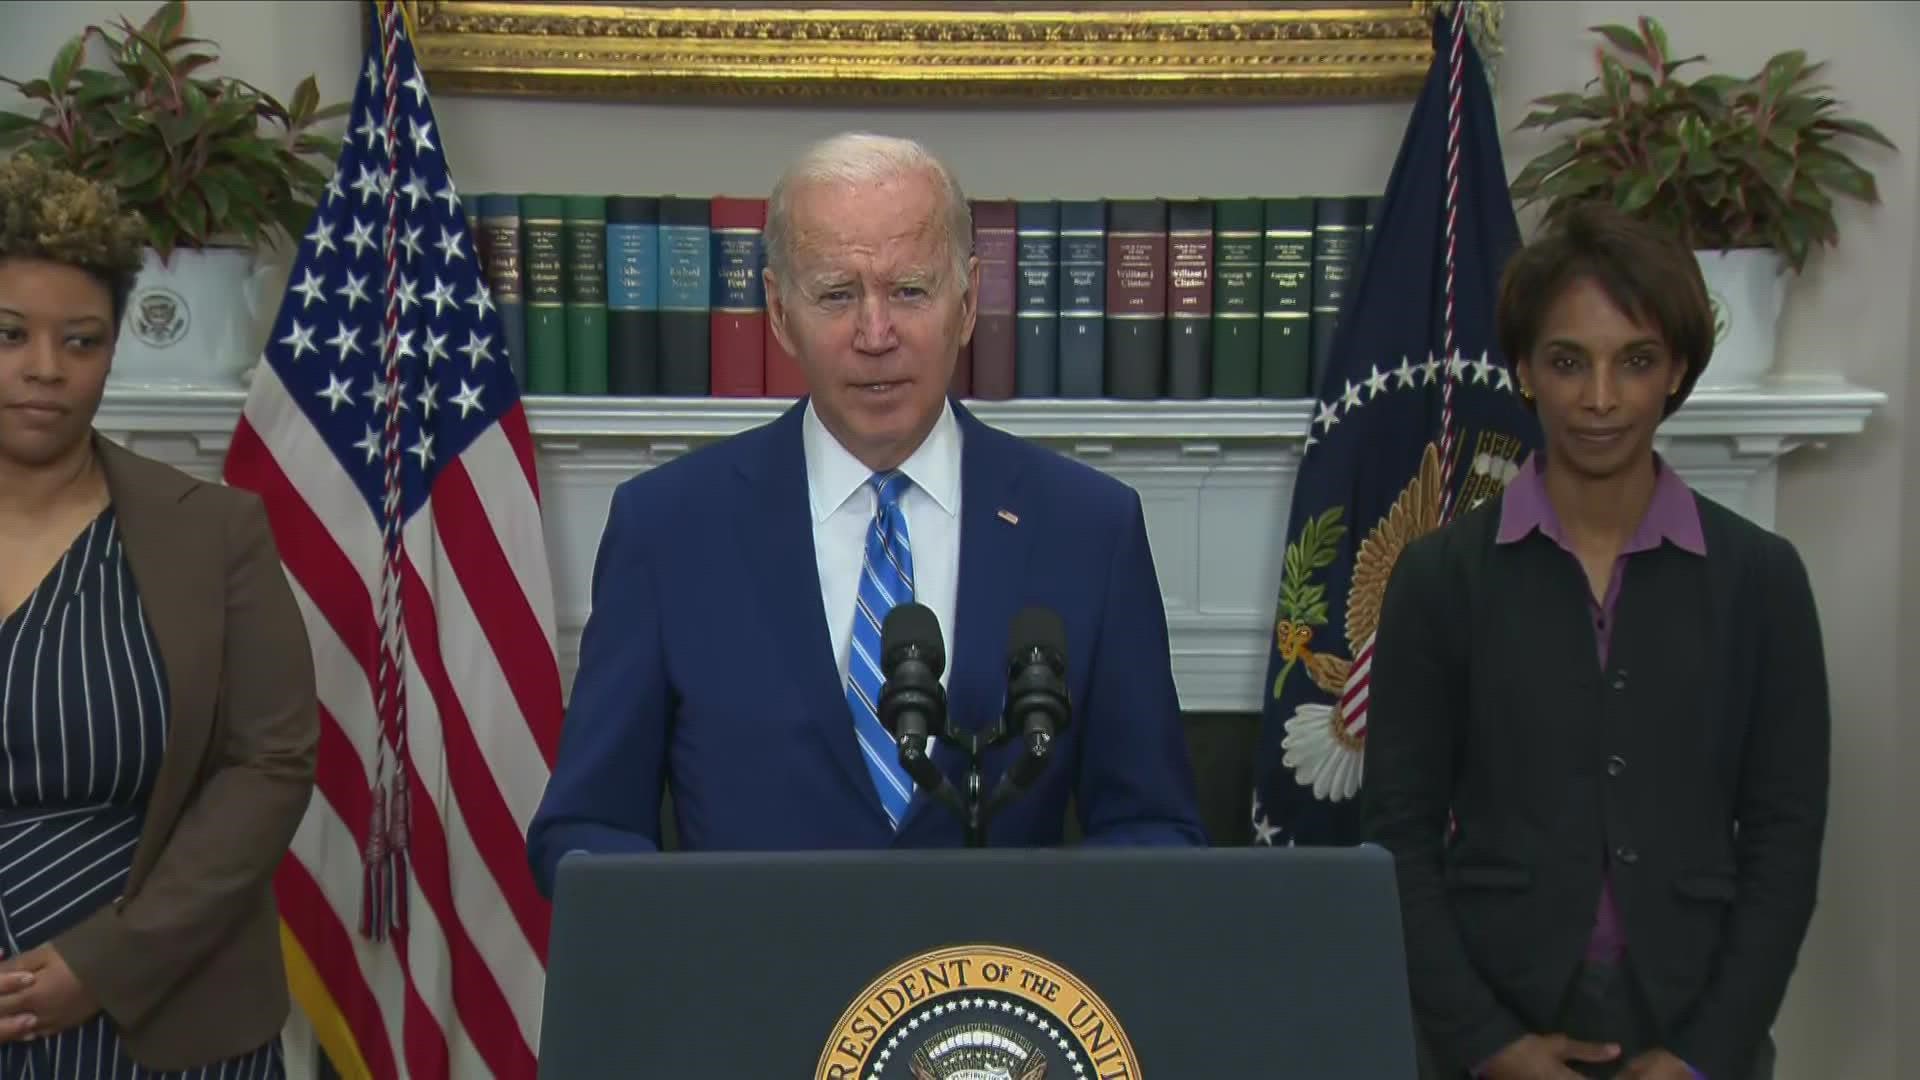 President Joe Biden laid blame on the rising deficit to the Trump administration, claiming his predecessor's signature tax cut did not pay for itself.